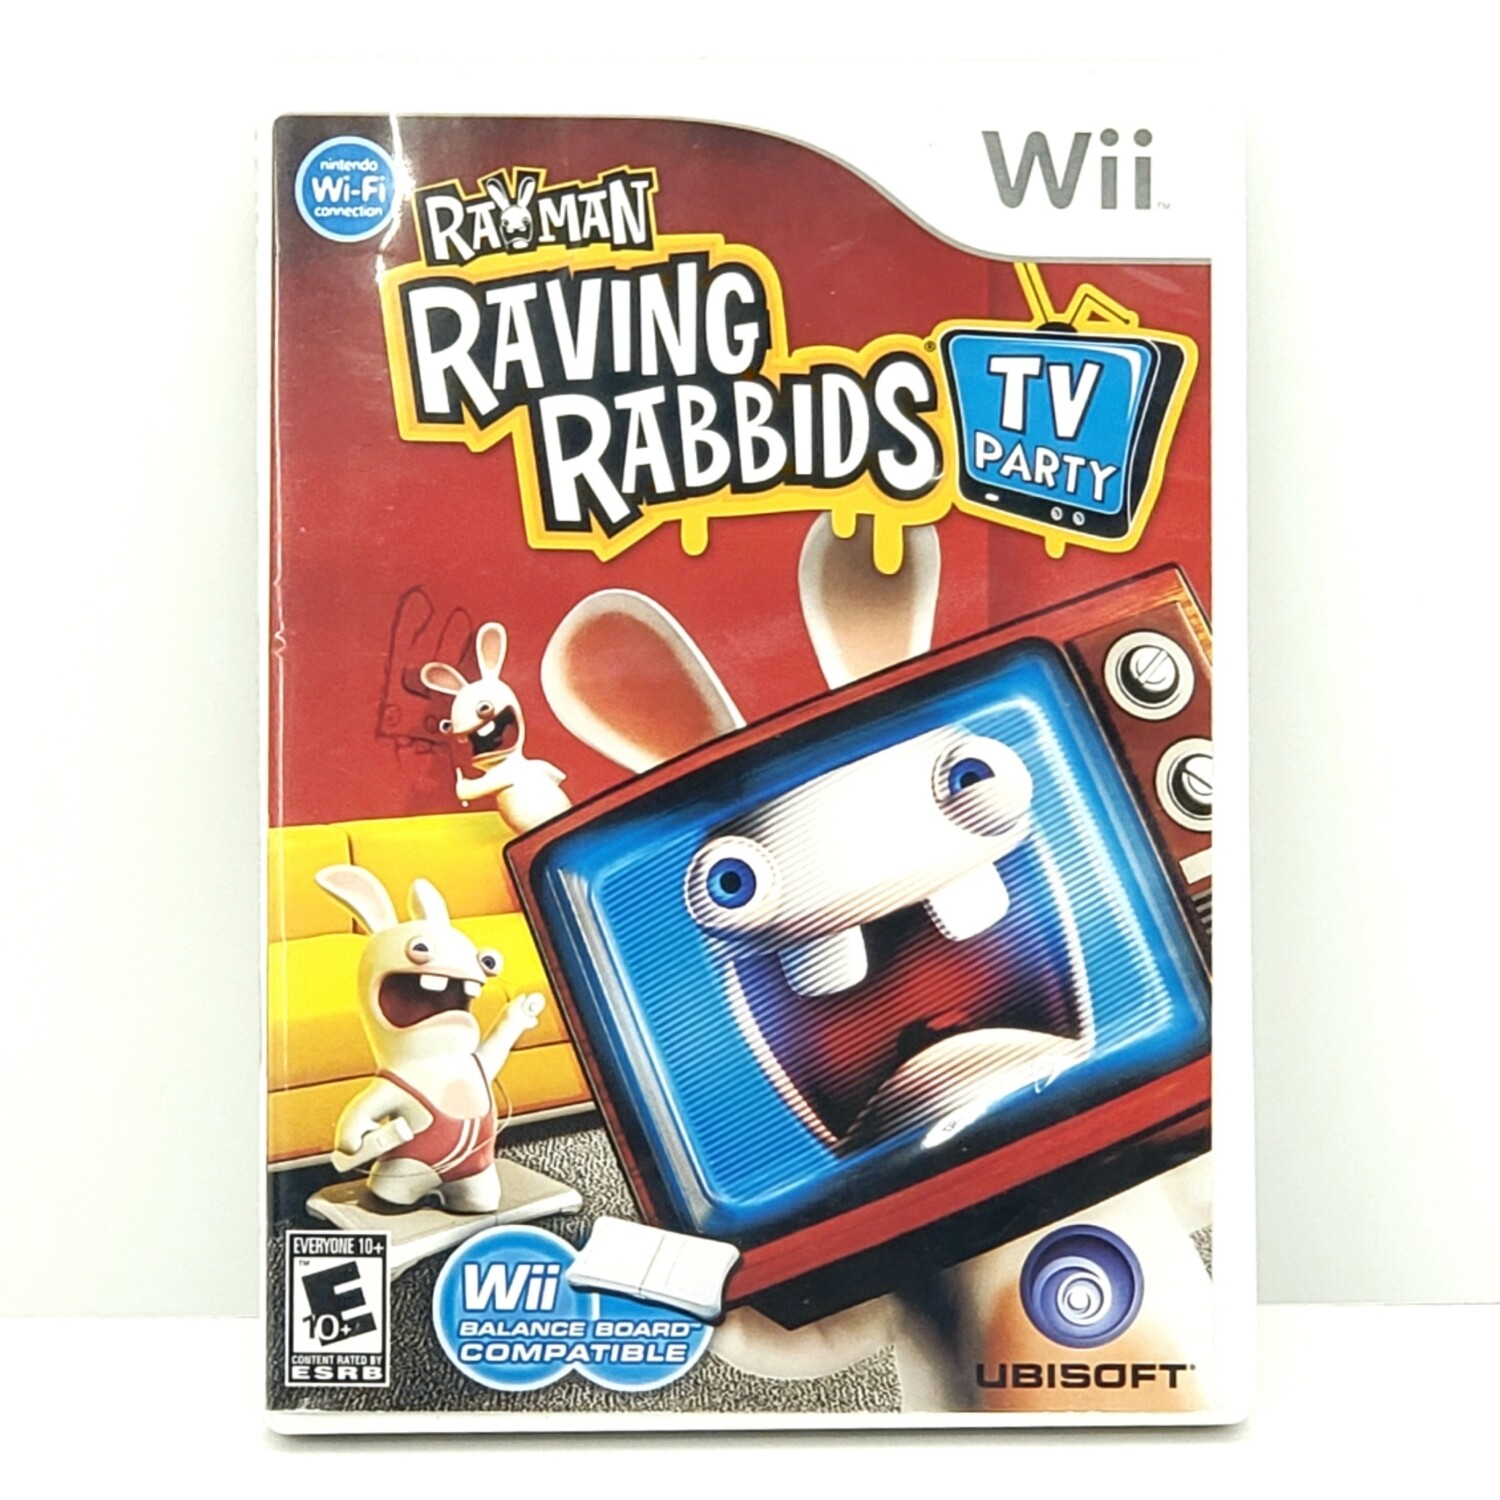 delicaat Briljant Vochtig Rayman Raving Rabbids TV Party Video Game for Wii - Used